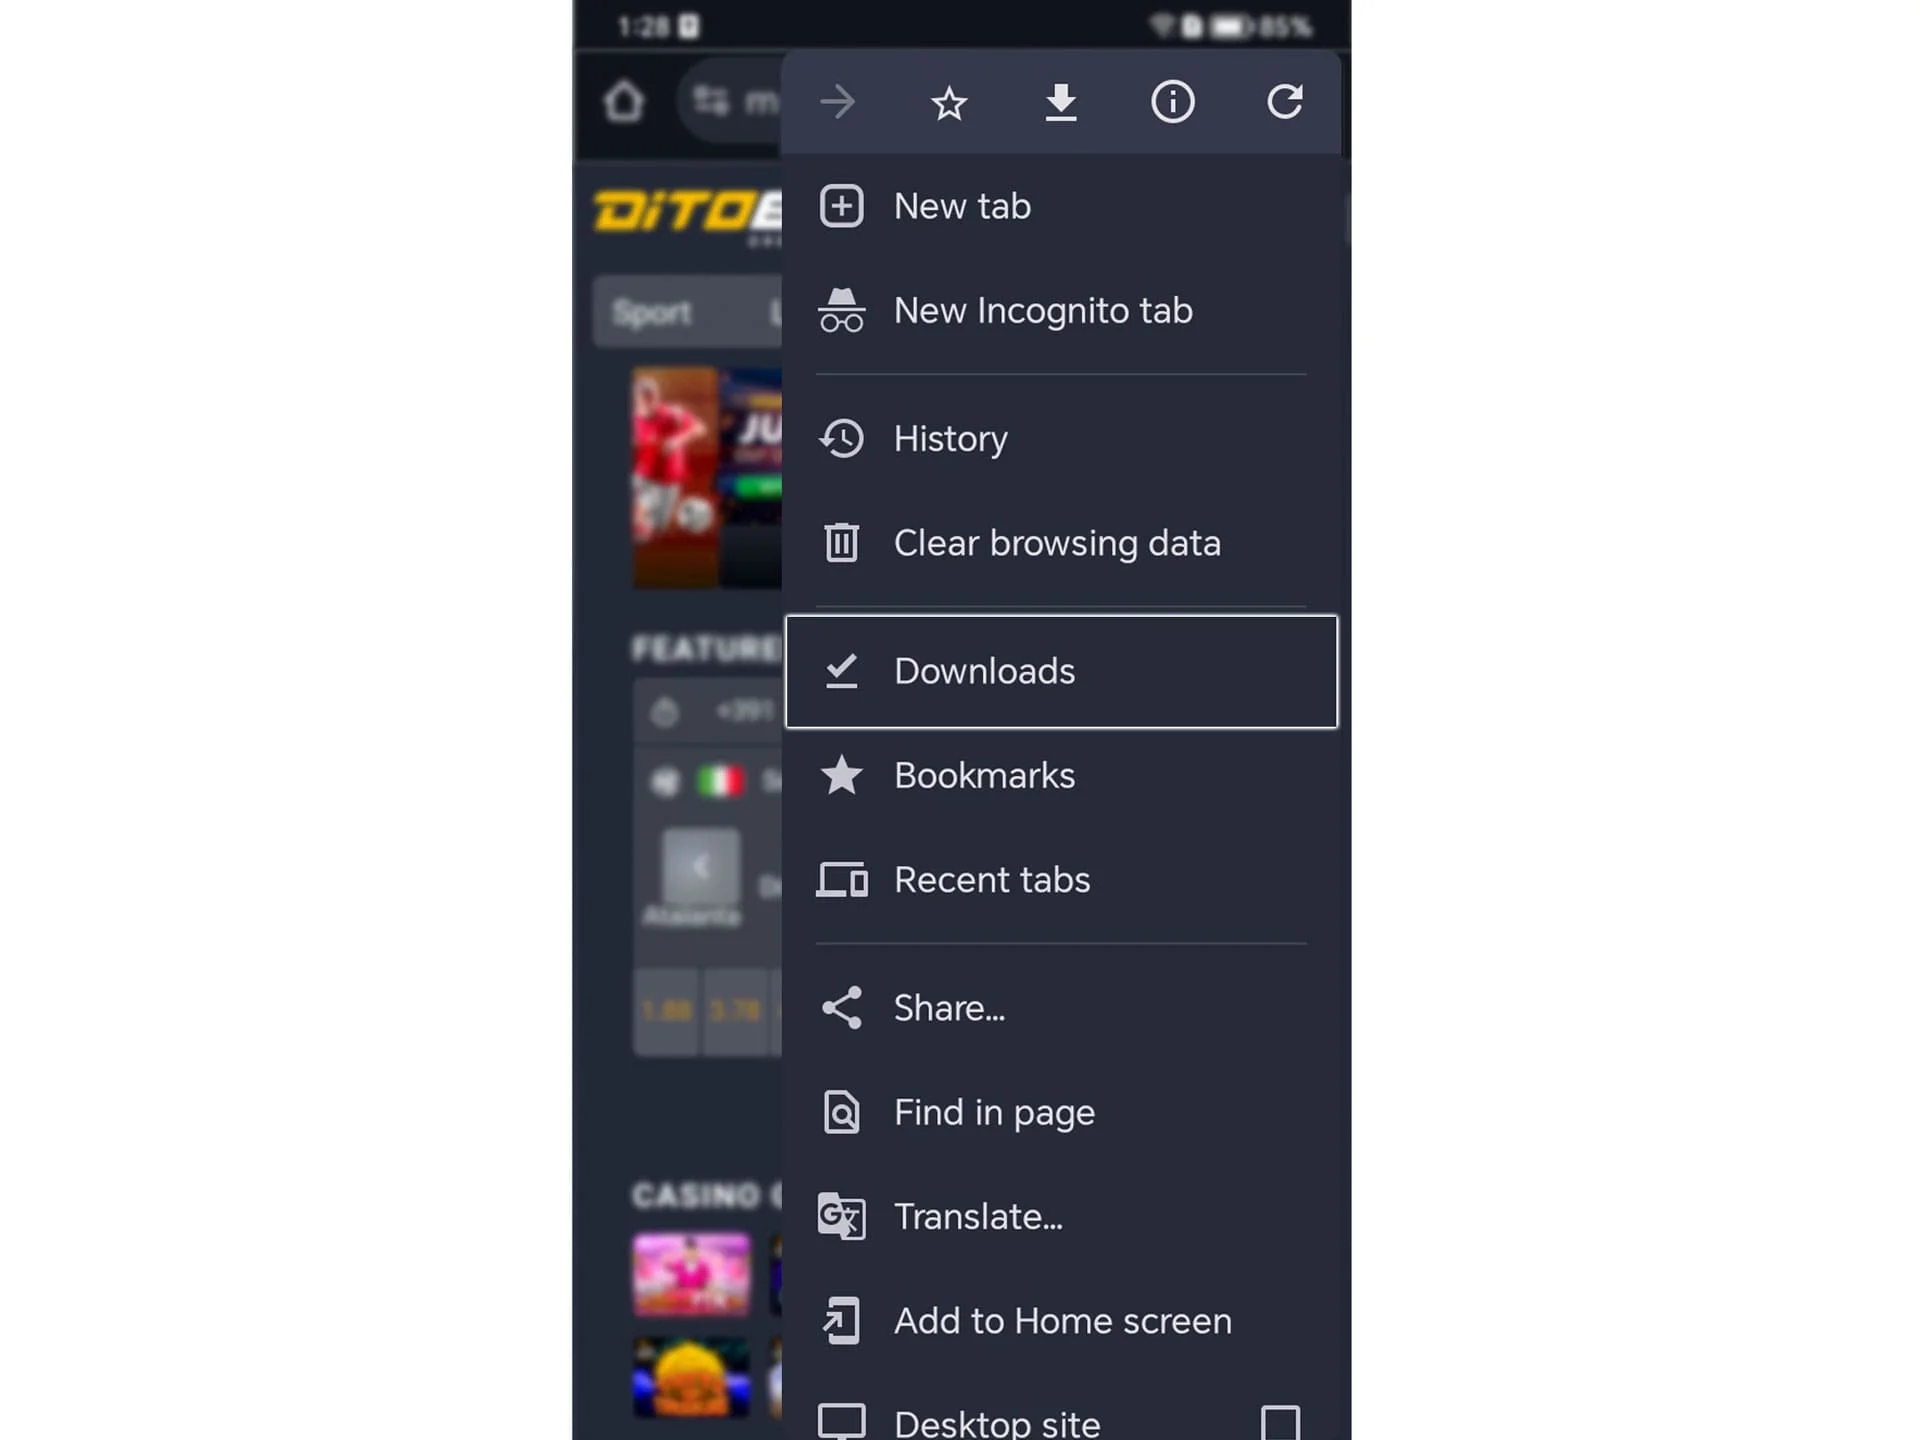 Check your internet connection and wait for the Ditobet app installation file to finish downloading.